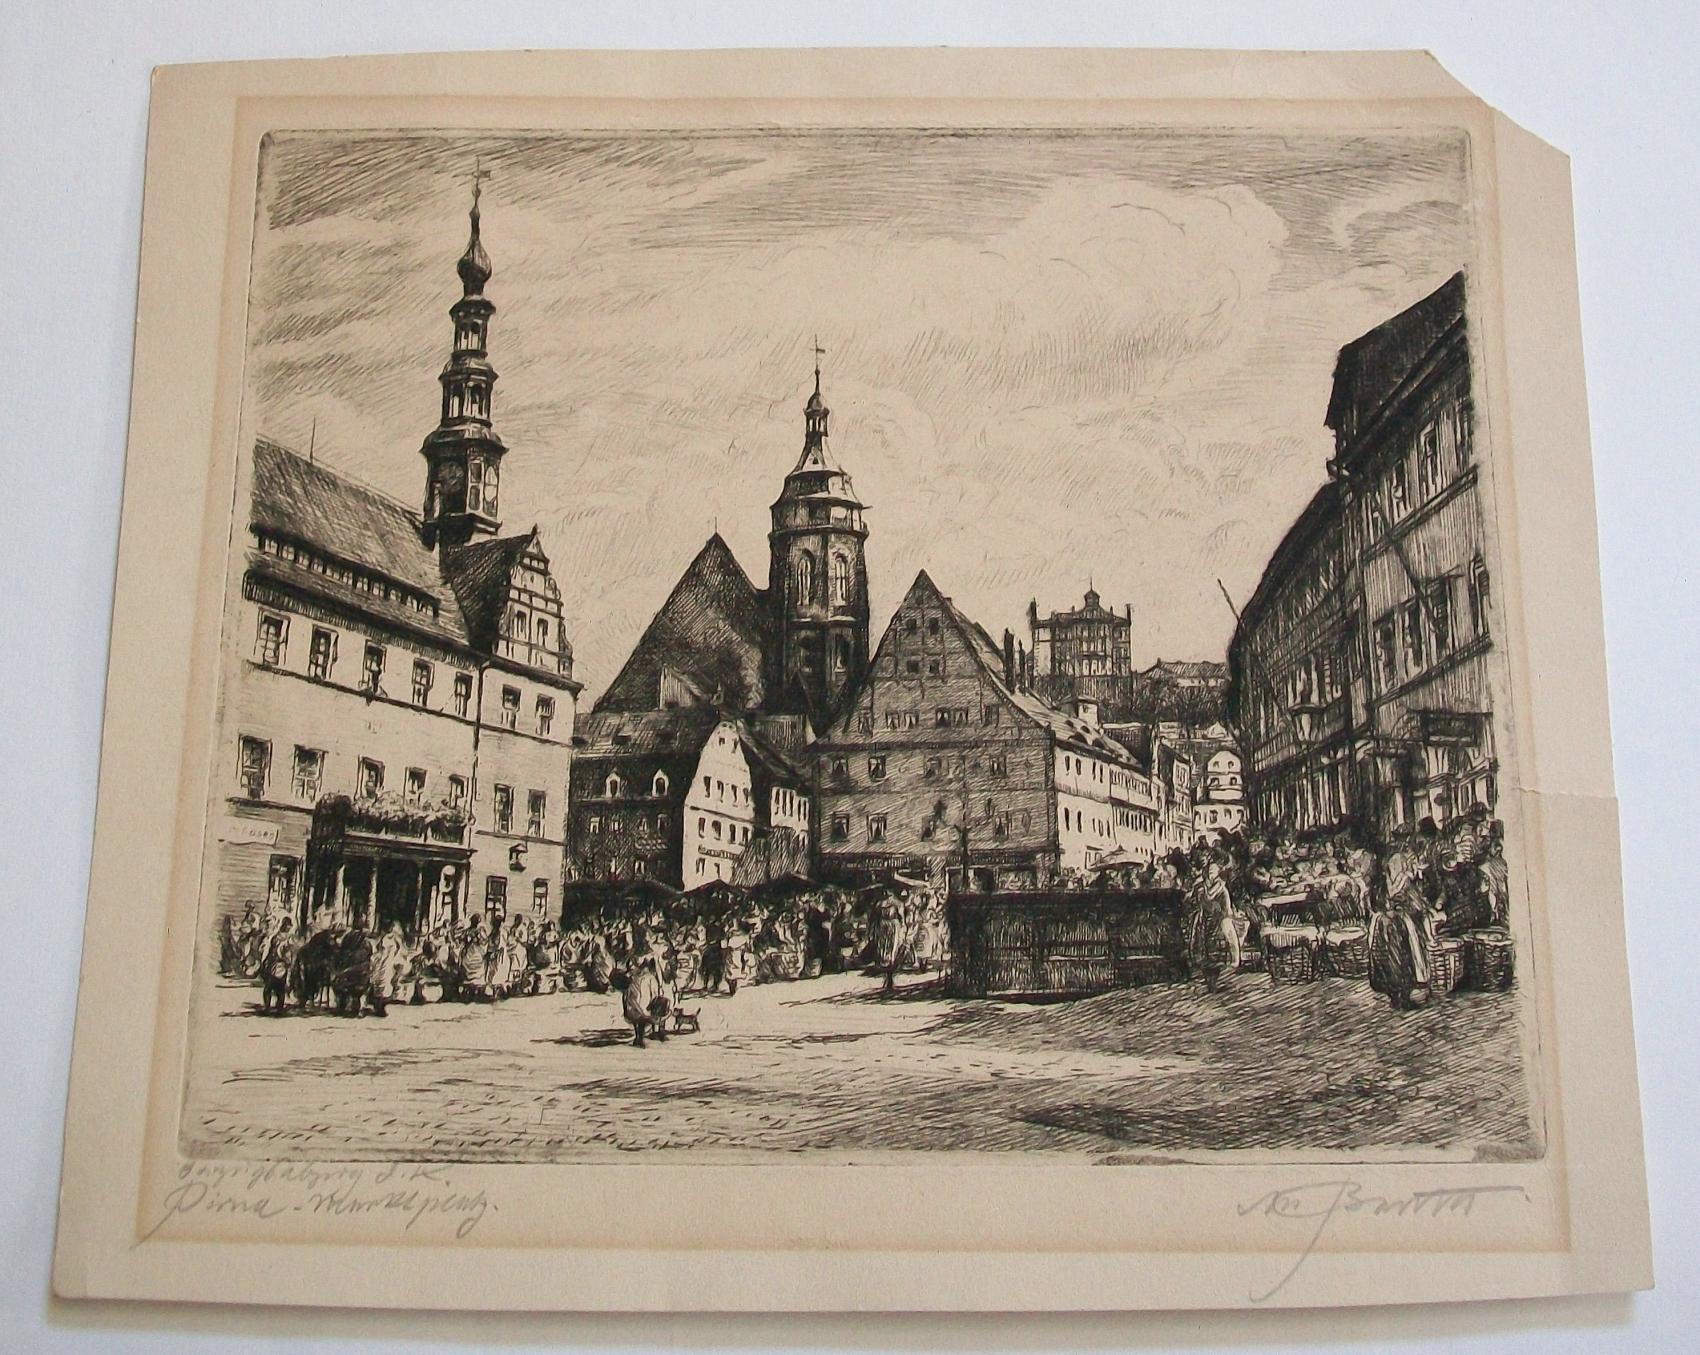 Renaissance 'The Market Square at Pirna' - Antique Engraving - Germany - 18th/19th Century For Sale